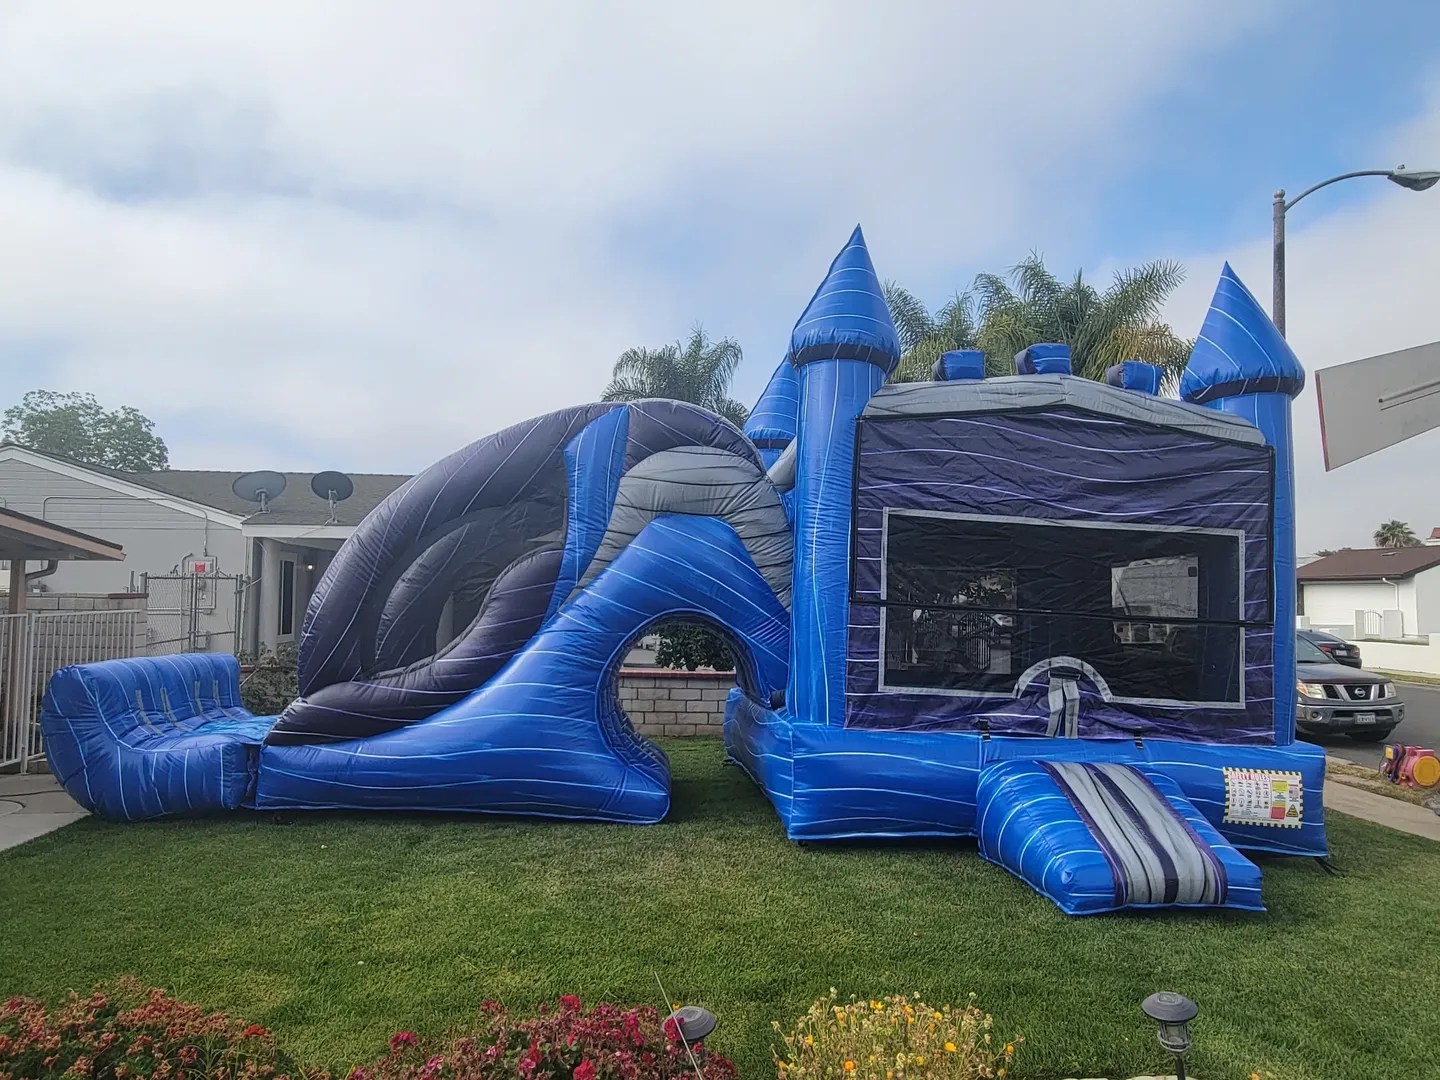 A blue and silver bouncy castle with slide.